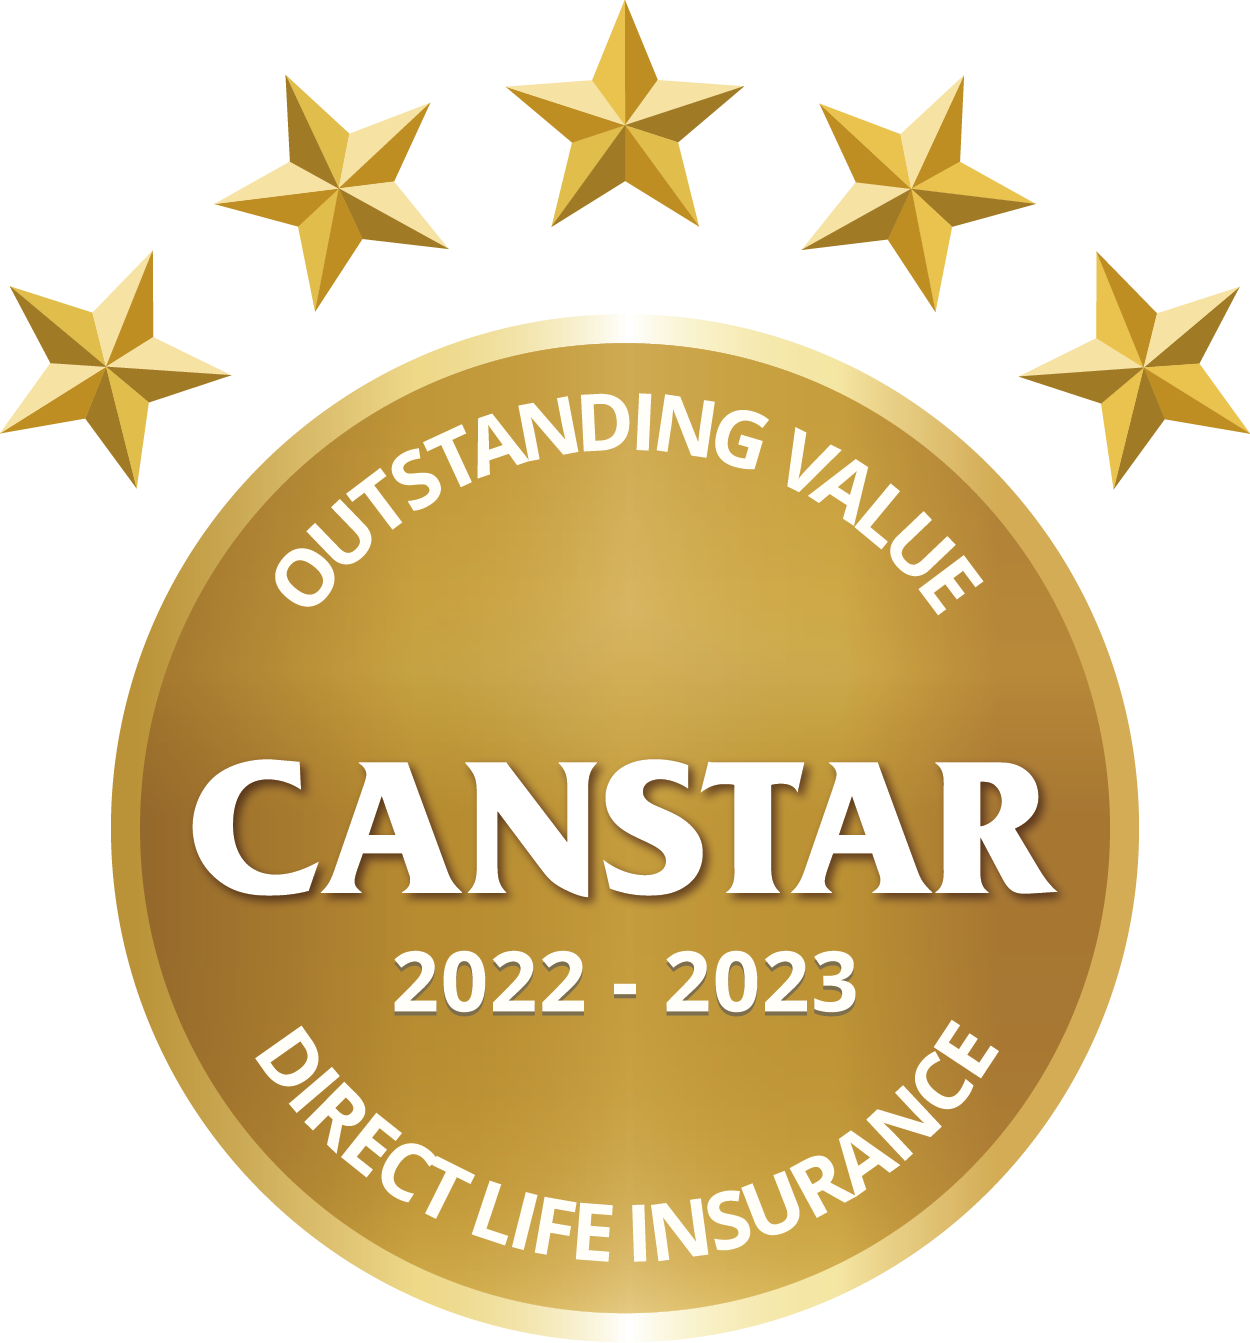 Canstar Direct Life Insurer - Outstanding Value 2022